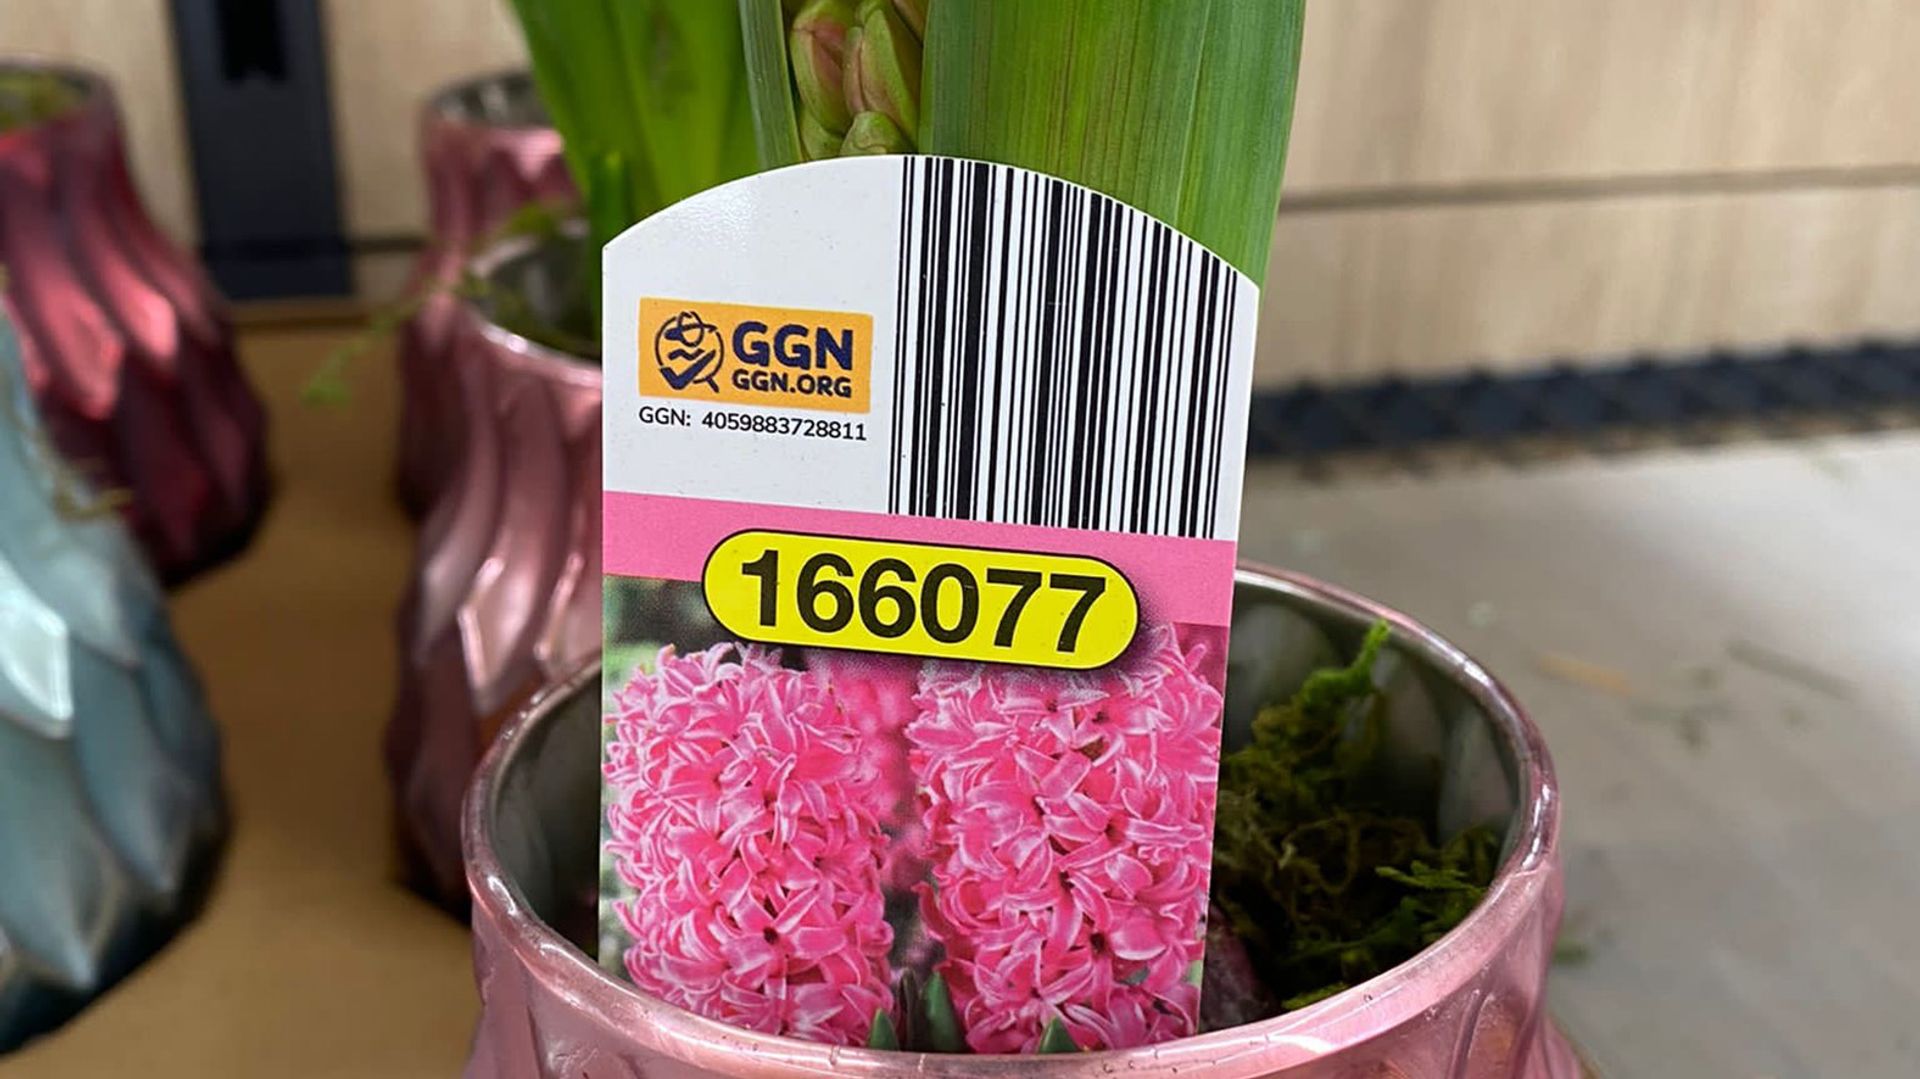 Image of a potted flower plant with the GGN label